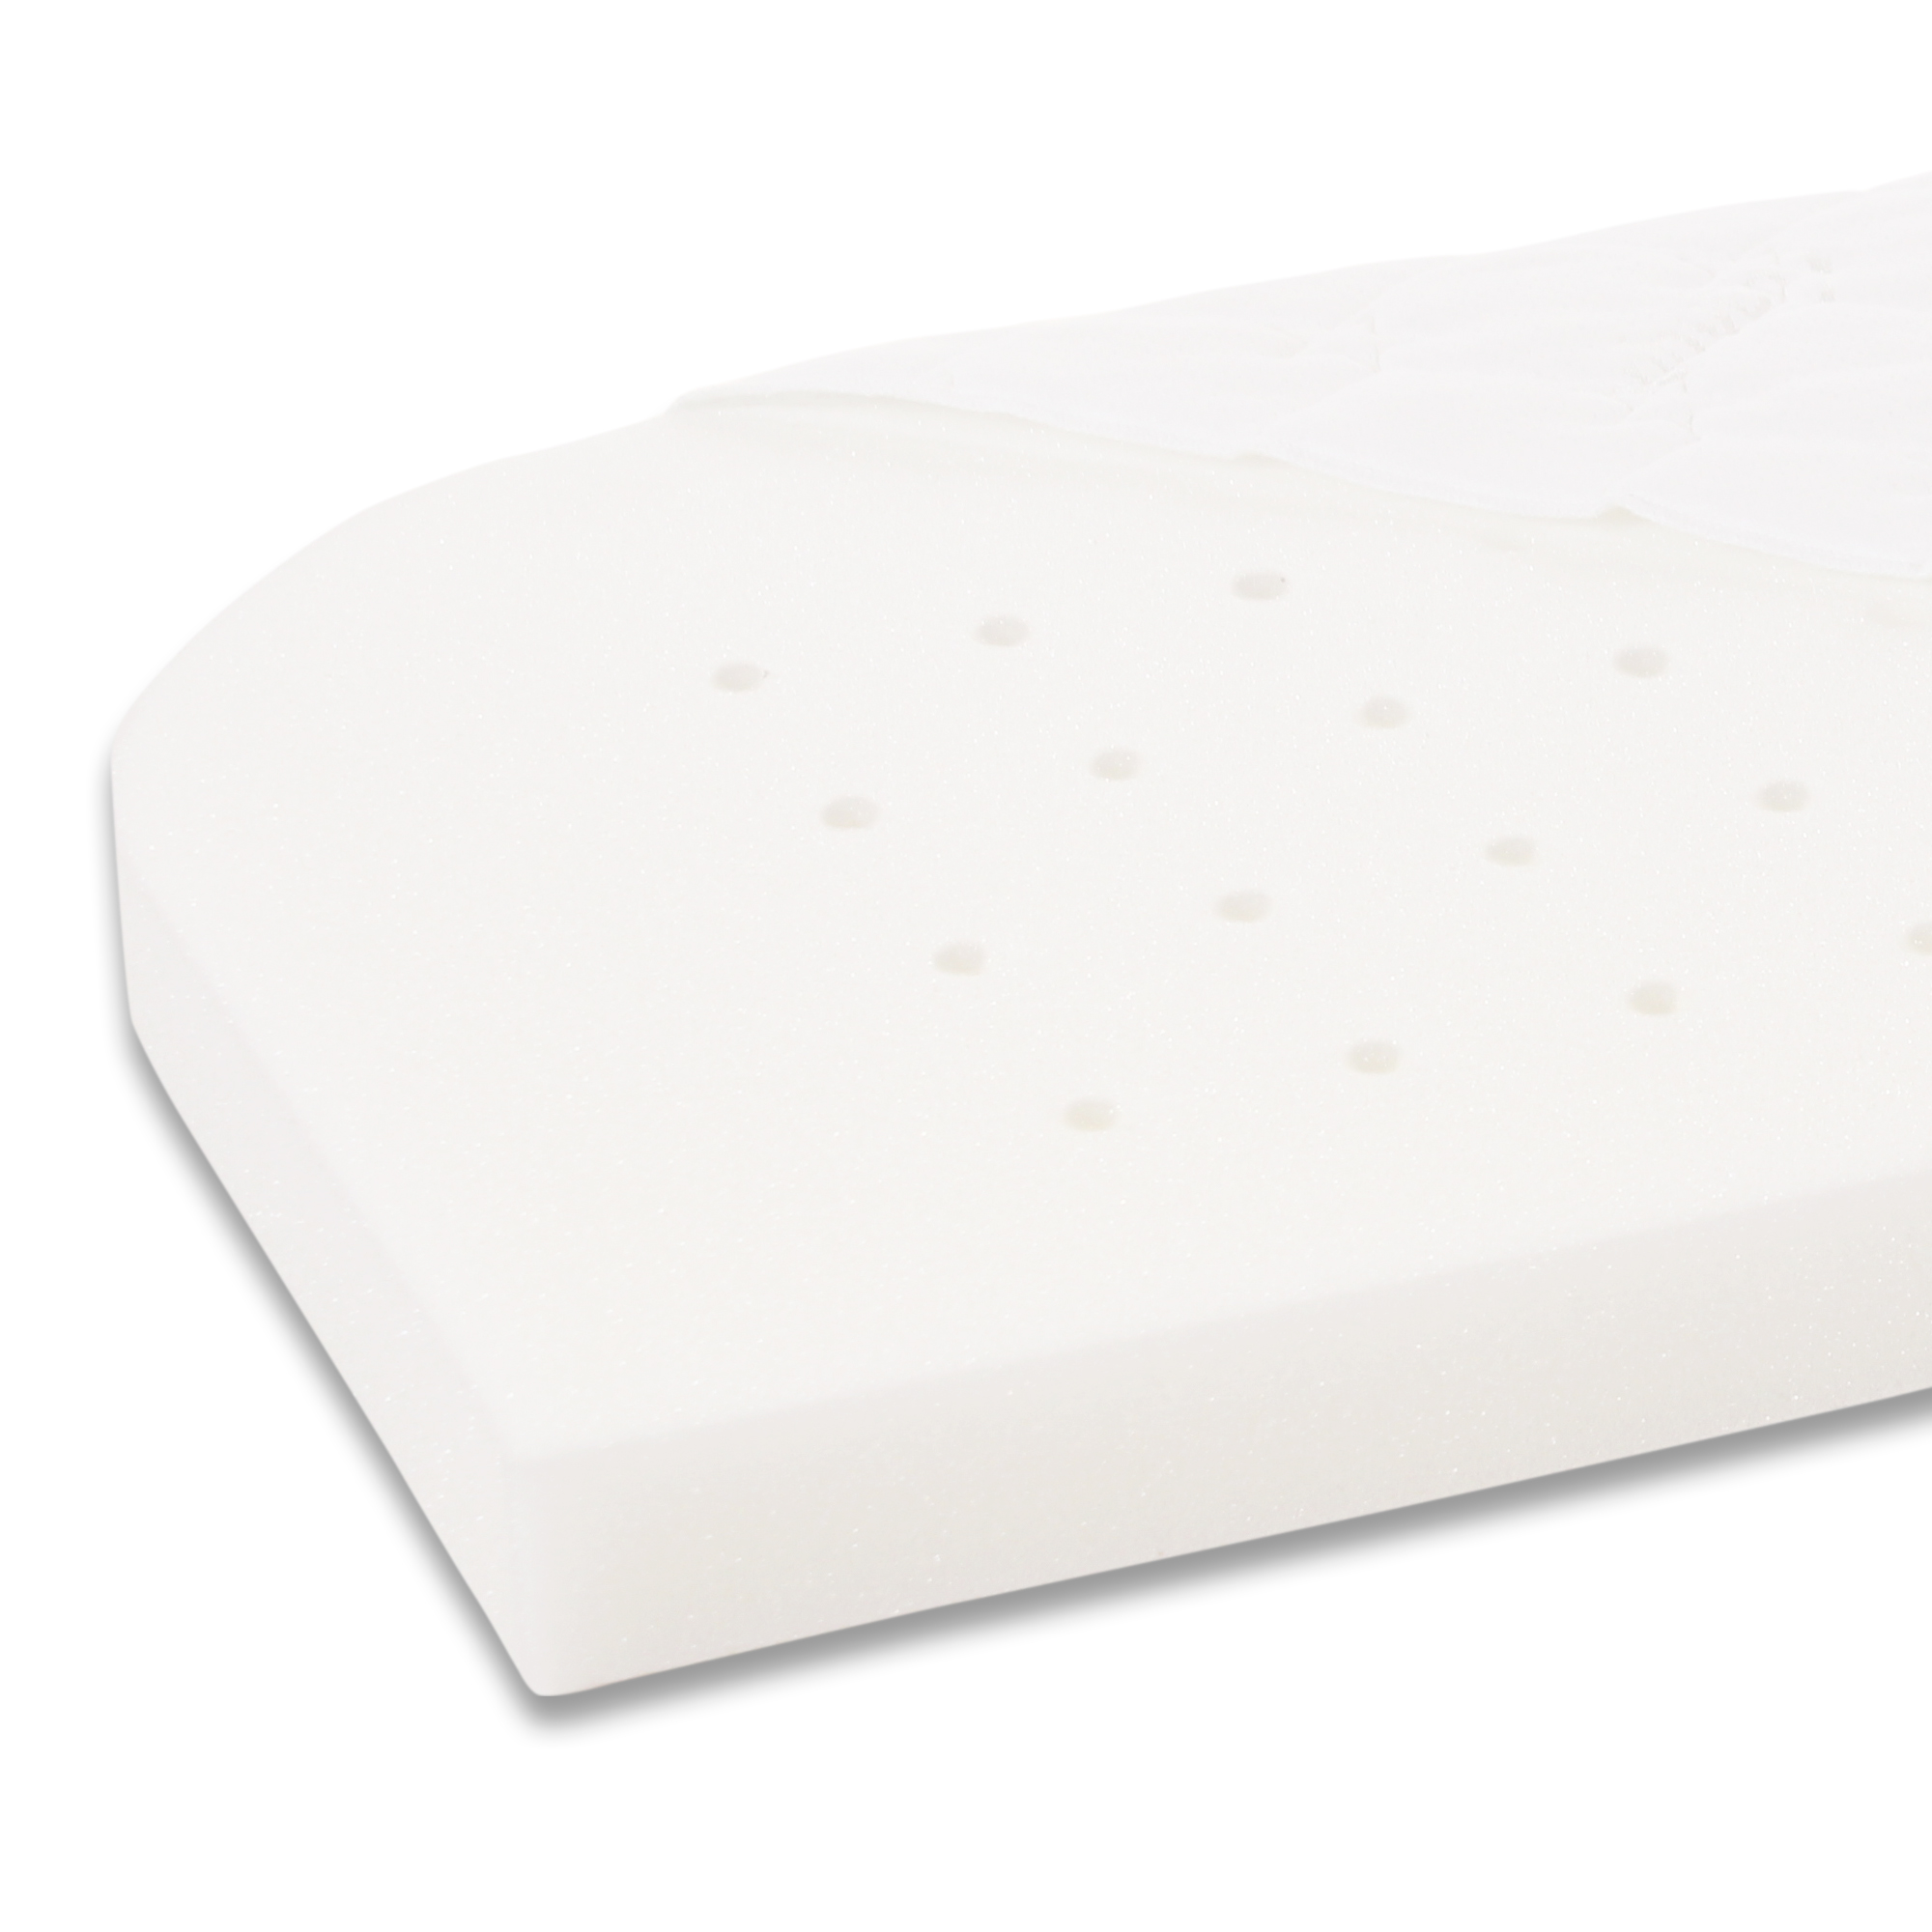 CODODO FITTED SHEET or MATTRESS PAD FOR BED BABYBAY